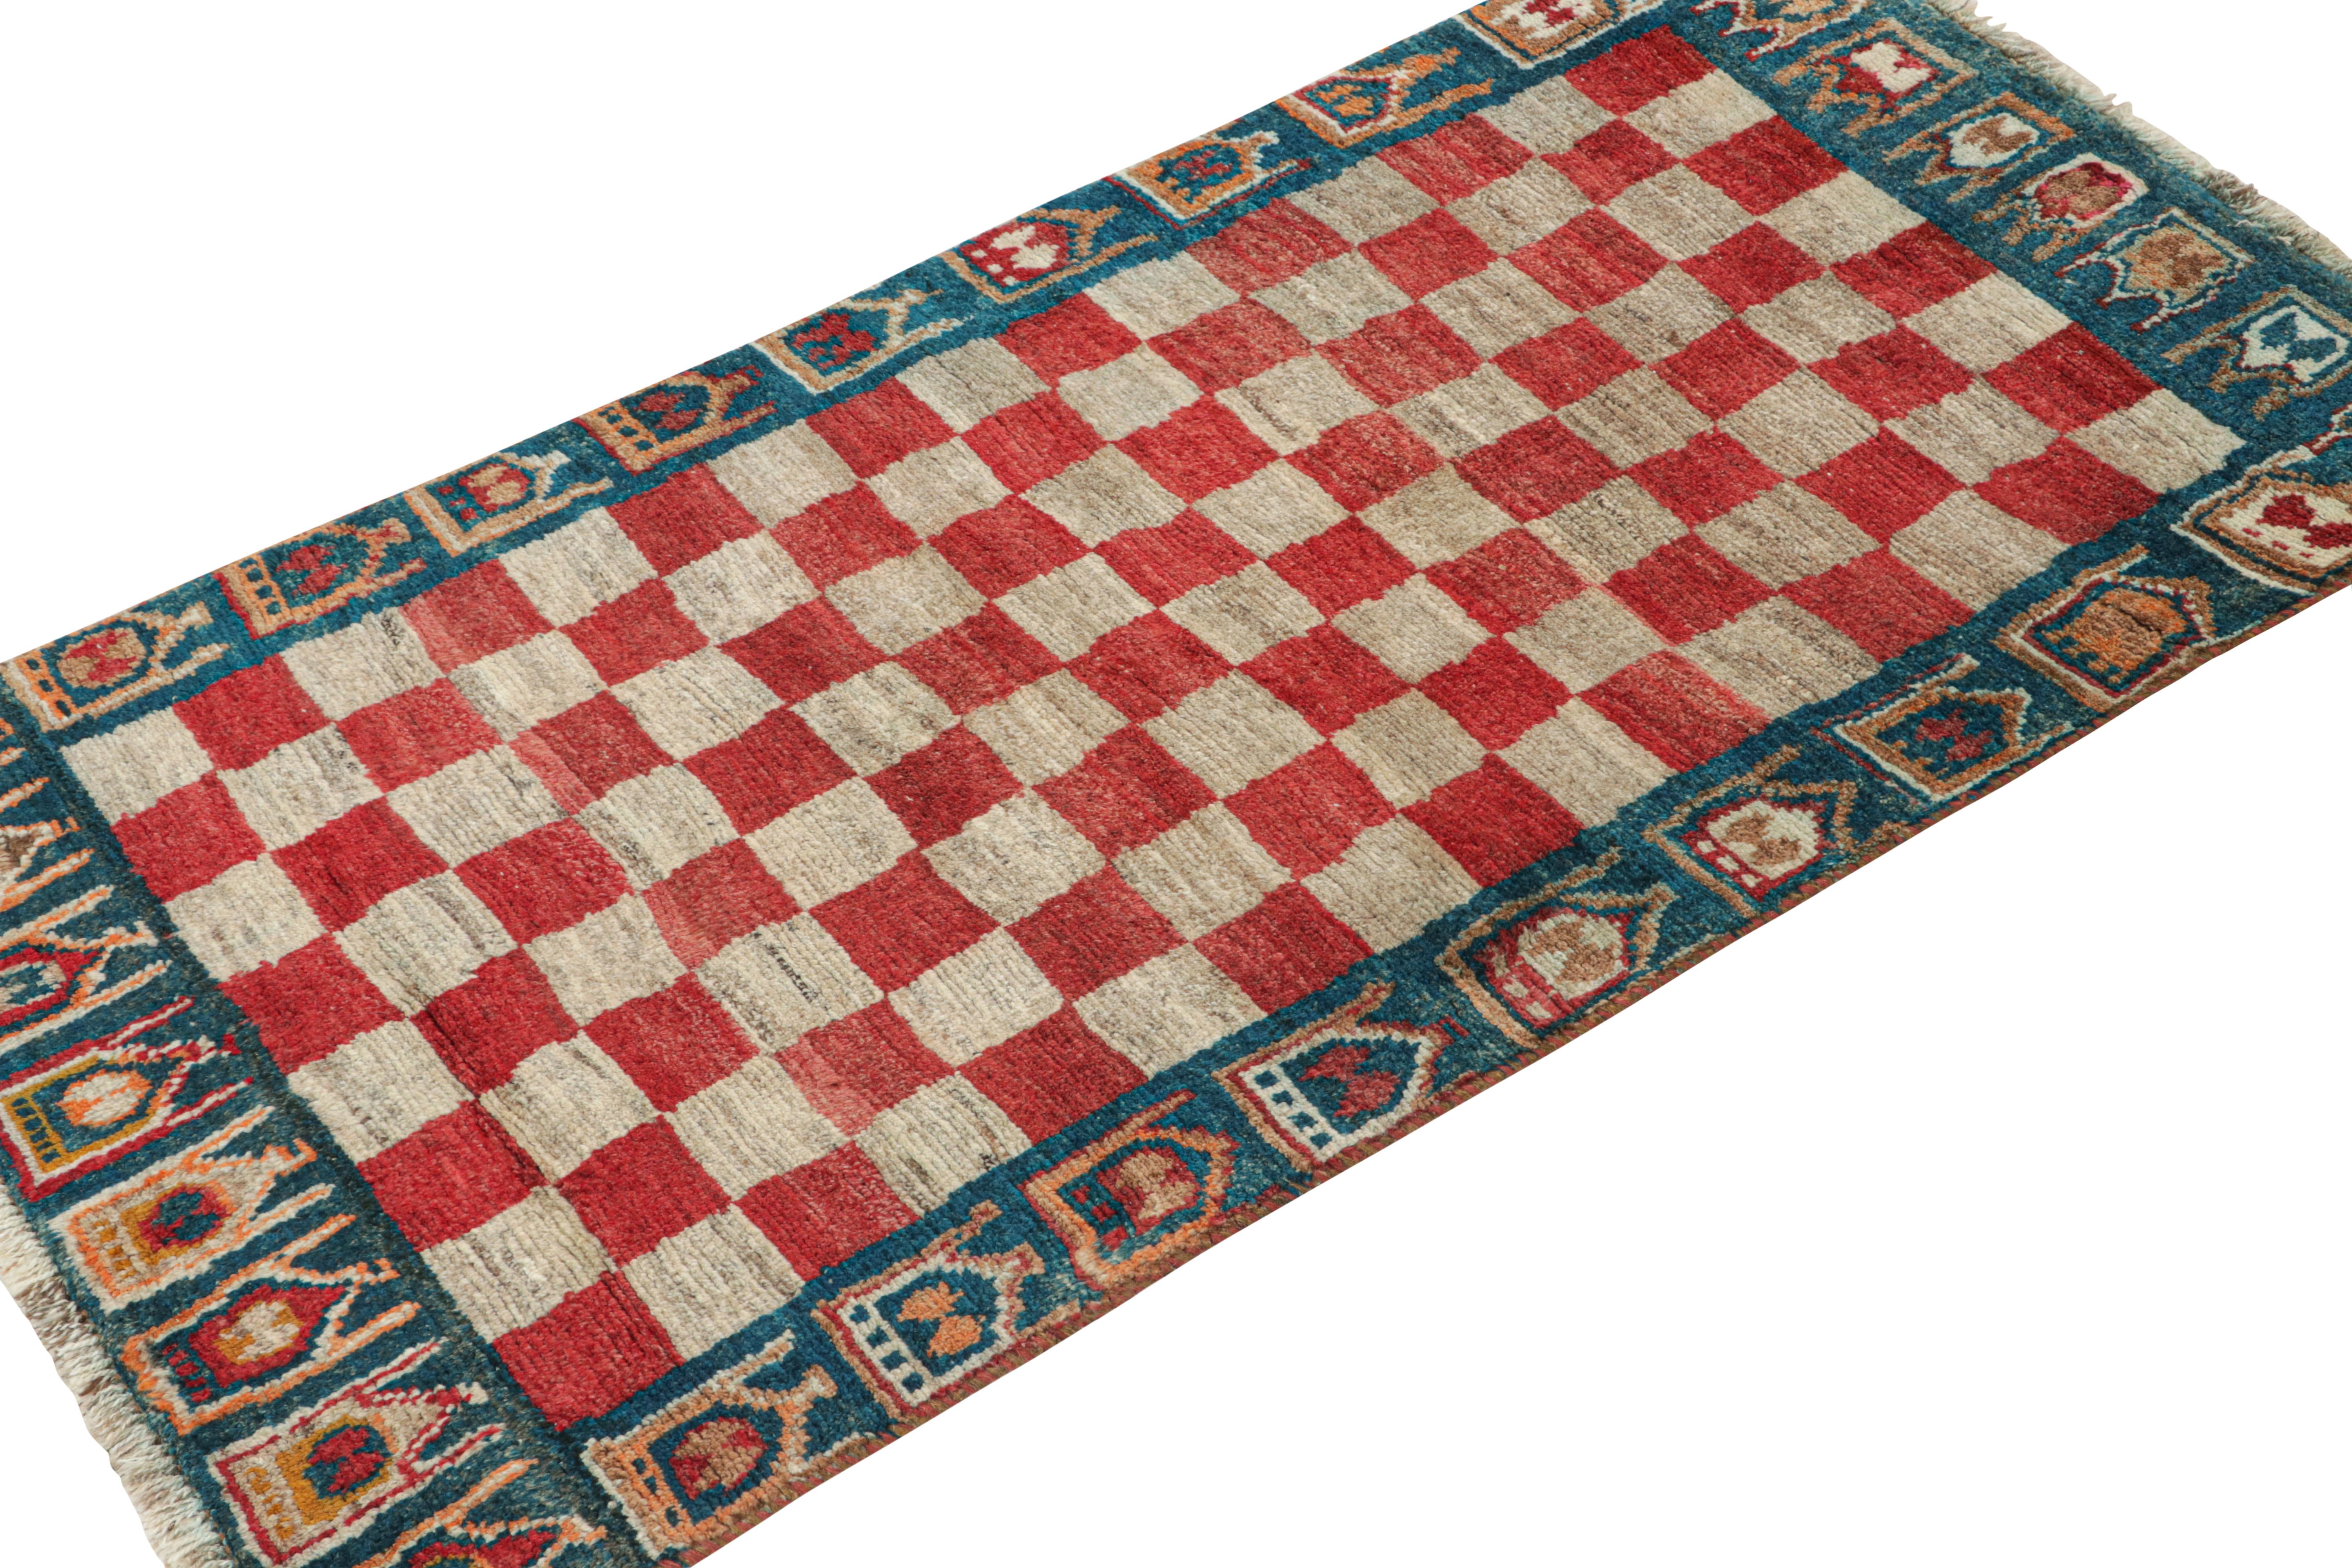 Tribal Vintage Qashqai Persian Gabbeh Runner with Checkerboard Pattern by Rug & Kilim For Sale